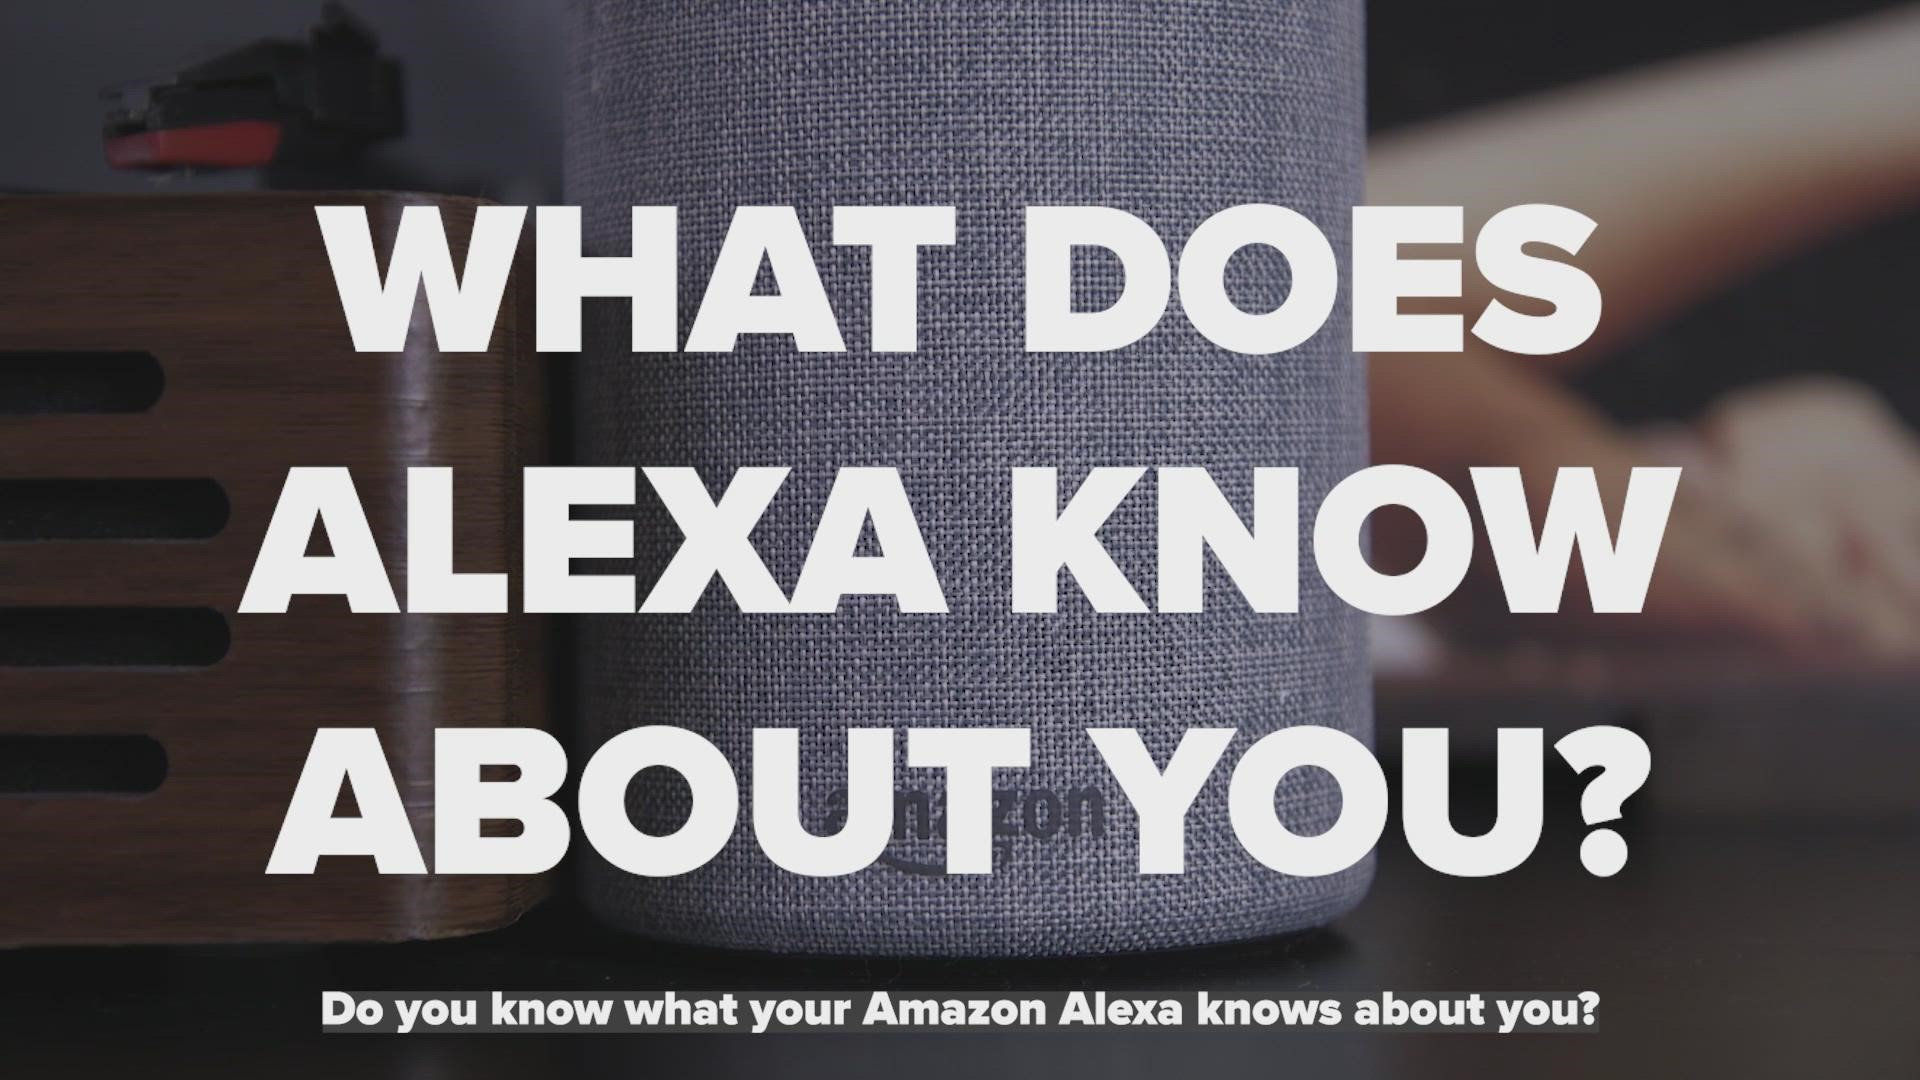 Amazon Alexa saves your voice recordings. Here's how you can delete them.